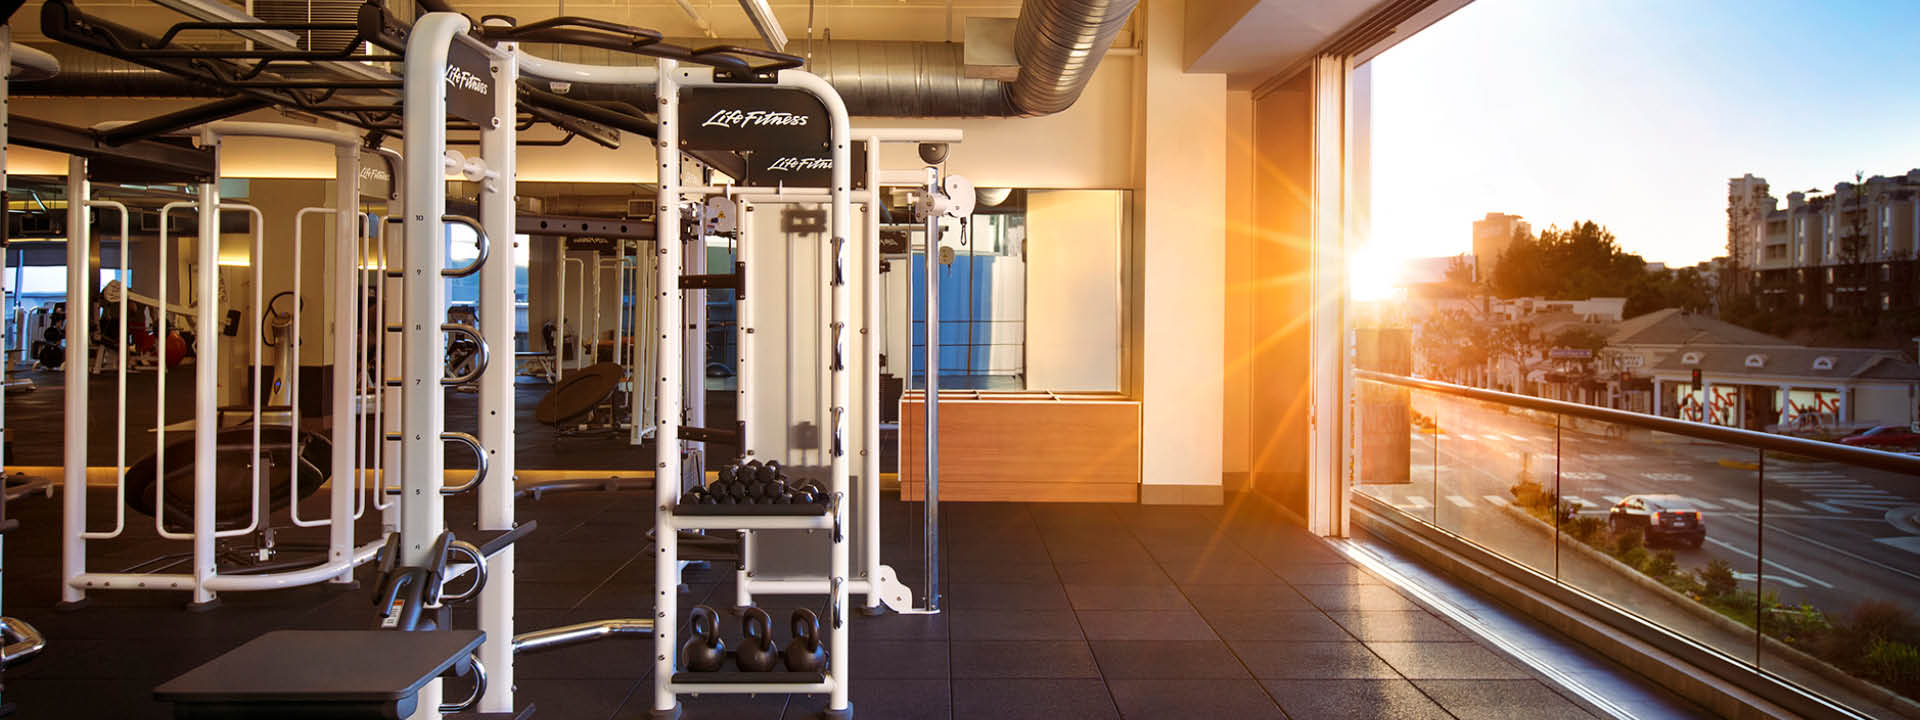 gyms in west hollywood: fitness clubs with yoga & pilates classes